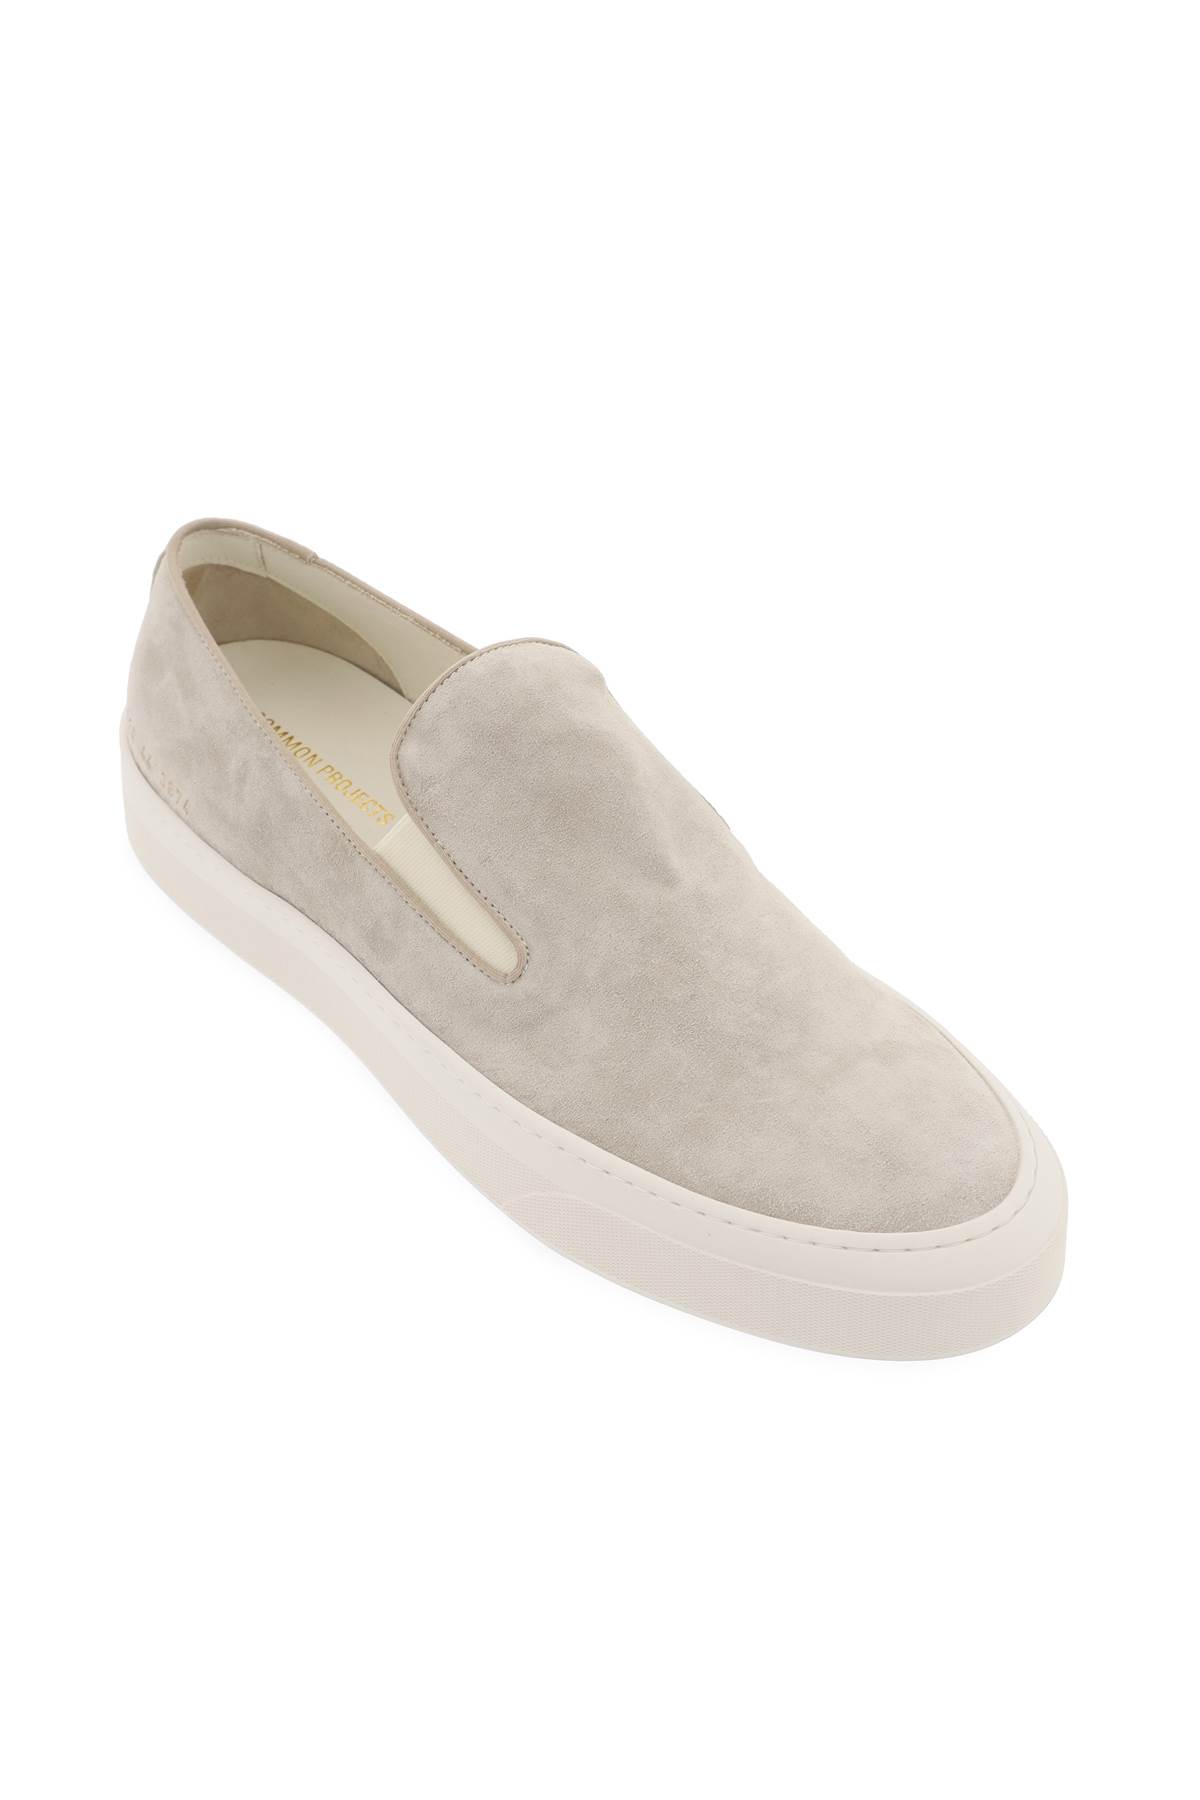 Shop Common Projects Slip-on Sneakers In Warm Grey (grey)